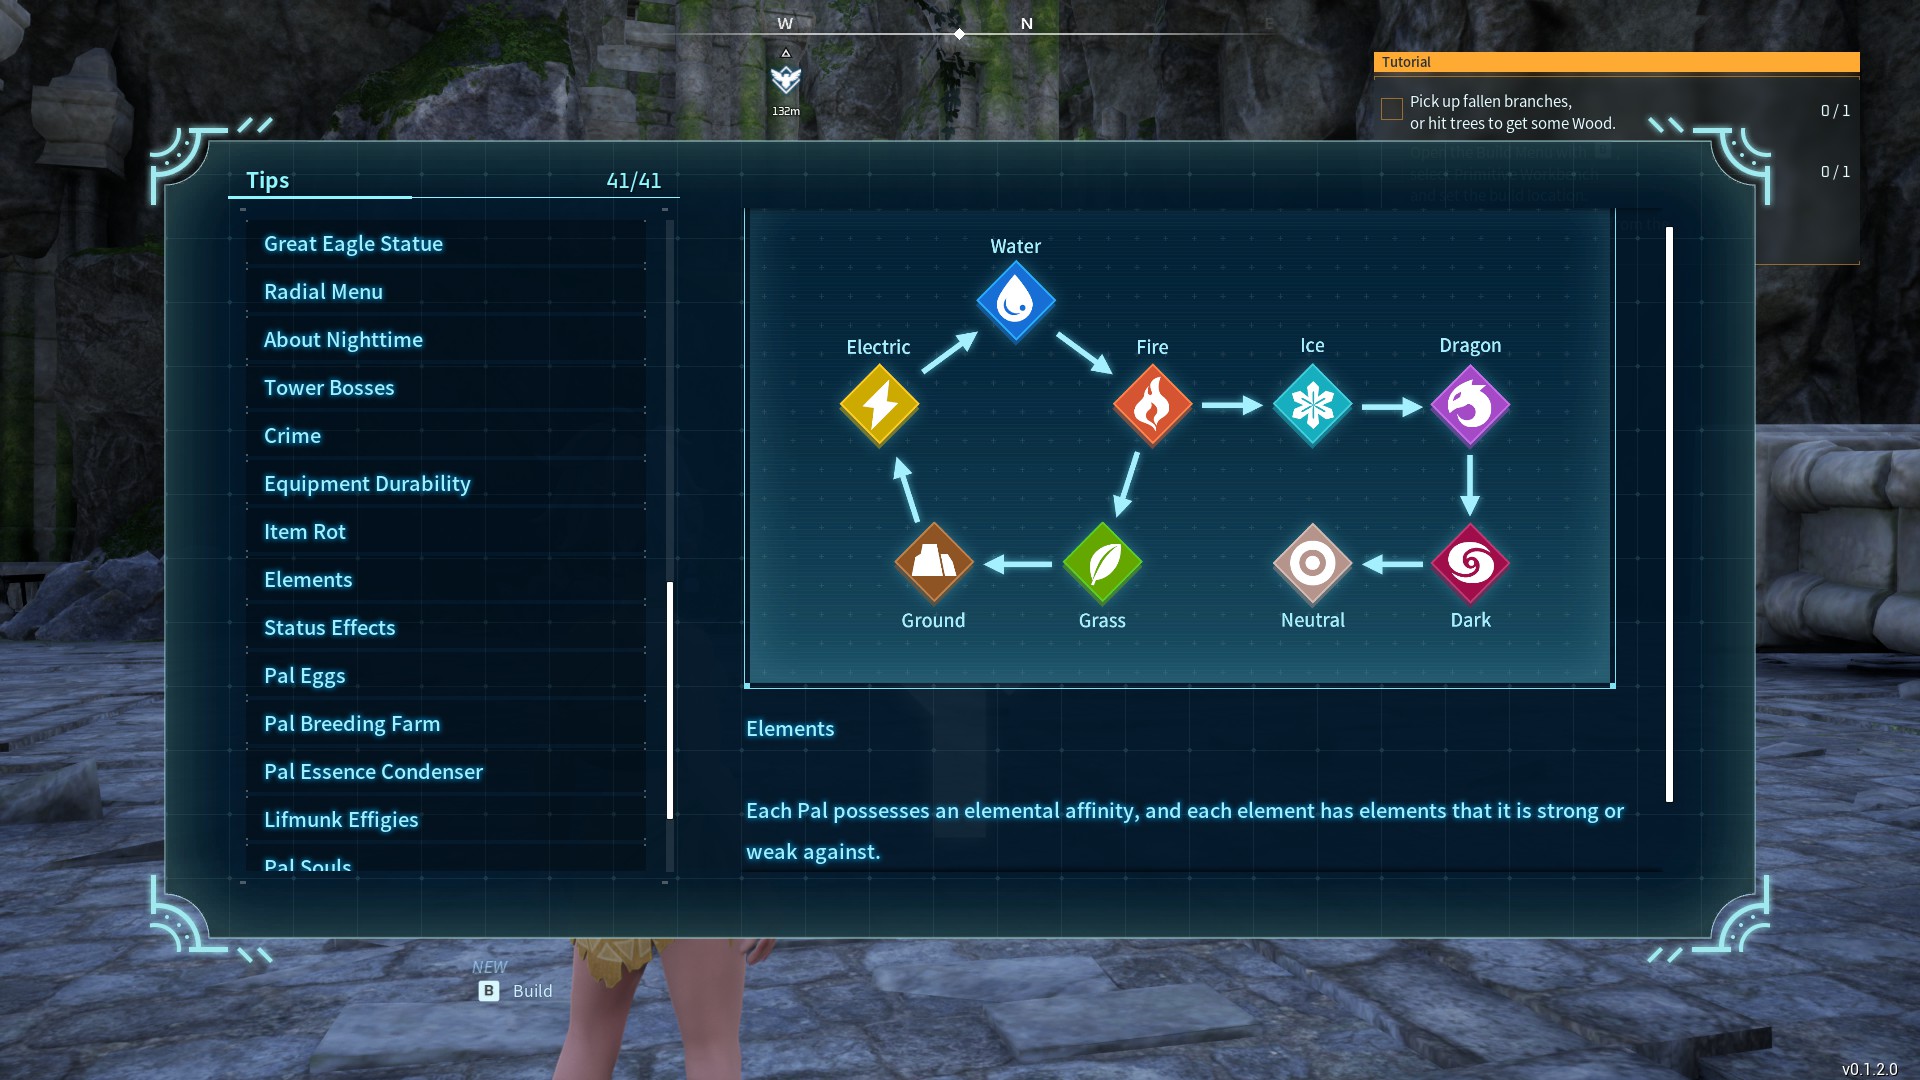 Elemental weaknesses and resistances are important in this game; weaknesses are particularly important, as the damage is very, very high.The chart is pretty simple – most types have one weakness and one element whose type they exploit. Normal type pals are the worst, as they are vulnerable to dark and nothing is resistant to them.Note that Pals are resistant both to their own element type, as well as the element type that they exploit.Pals gain a 20% damage bonus if they are using an attack of the same type as what they are, but they deal double damage if they are using an element type that they exploit – as such, exploiting elements is more important than matching element types, but it is best to do both.You might think that Fire pals are the best pals – they have only one weakness, but are good against two kinds of pals. This is sort of true, but it is worth noting that there are extensive areas late in the game that are full of fire Pals, where these Pals are not particularly great offensively – though there are also late-game ice areas, where they are excellent.Having a variety of Pal types – and a variety of attack types – is helpful for making tough fights easier, especially as the game goes on towards the end and you can no longer simply outlevel threats. Exploiting the vulnerabilities of the final boss in the game is almost essential.Note also that Pals of different types also often have different affinities - for instance, fire pals almost always have kindling, the ability to cook food or smelt iron, while grass pals almost always have planting, and water pals watering. This makes having a variety of different Pal types very important for manning your base as well - however, not all pals are restricted to a single type of work, and some are more versatile.